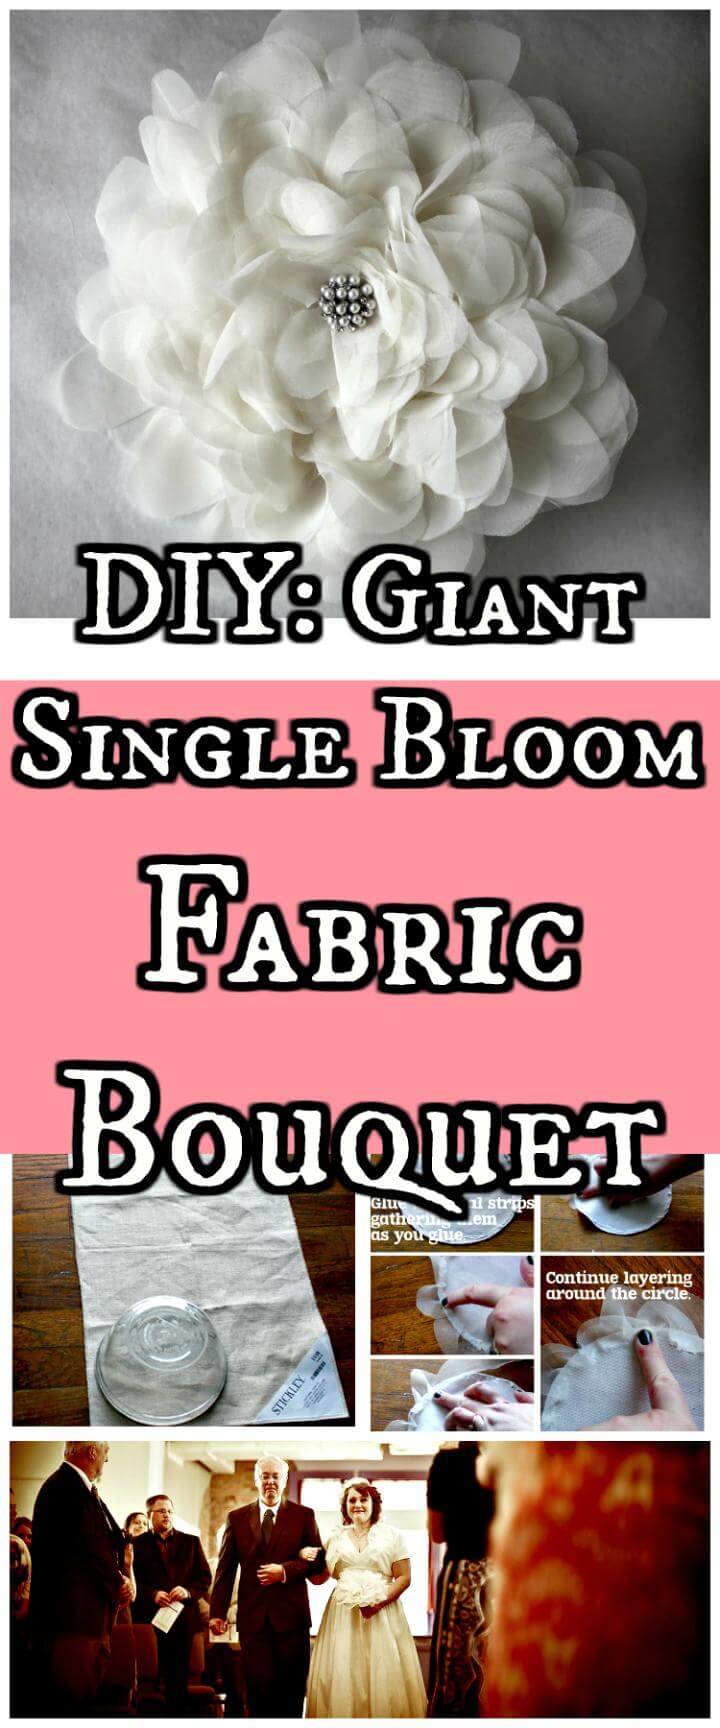 giant single bloom fabric bouquet